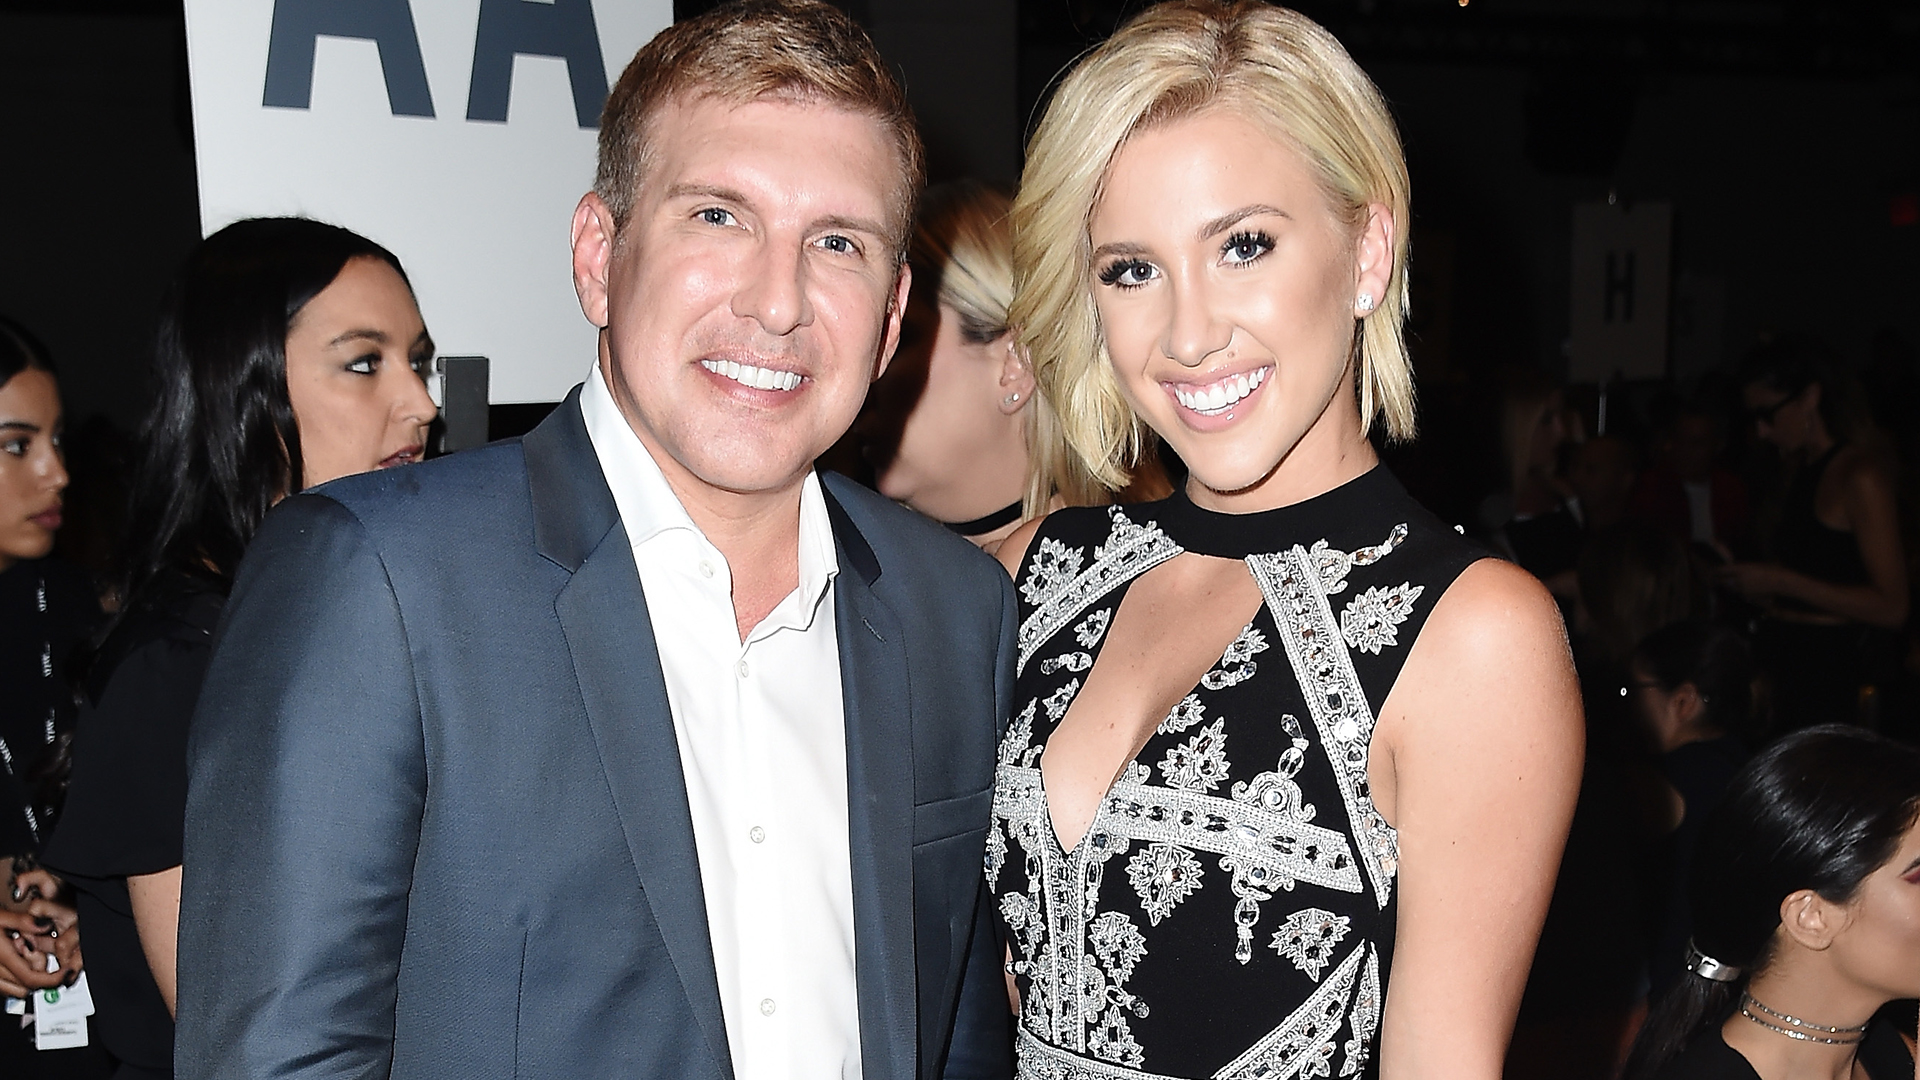 Chrisley Knows Best #4